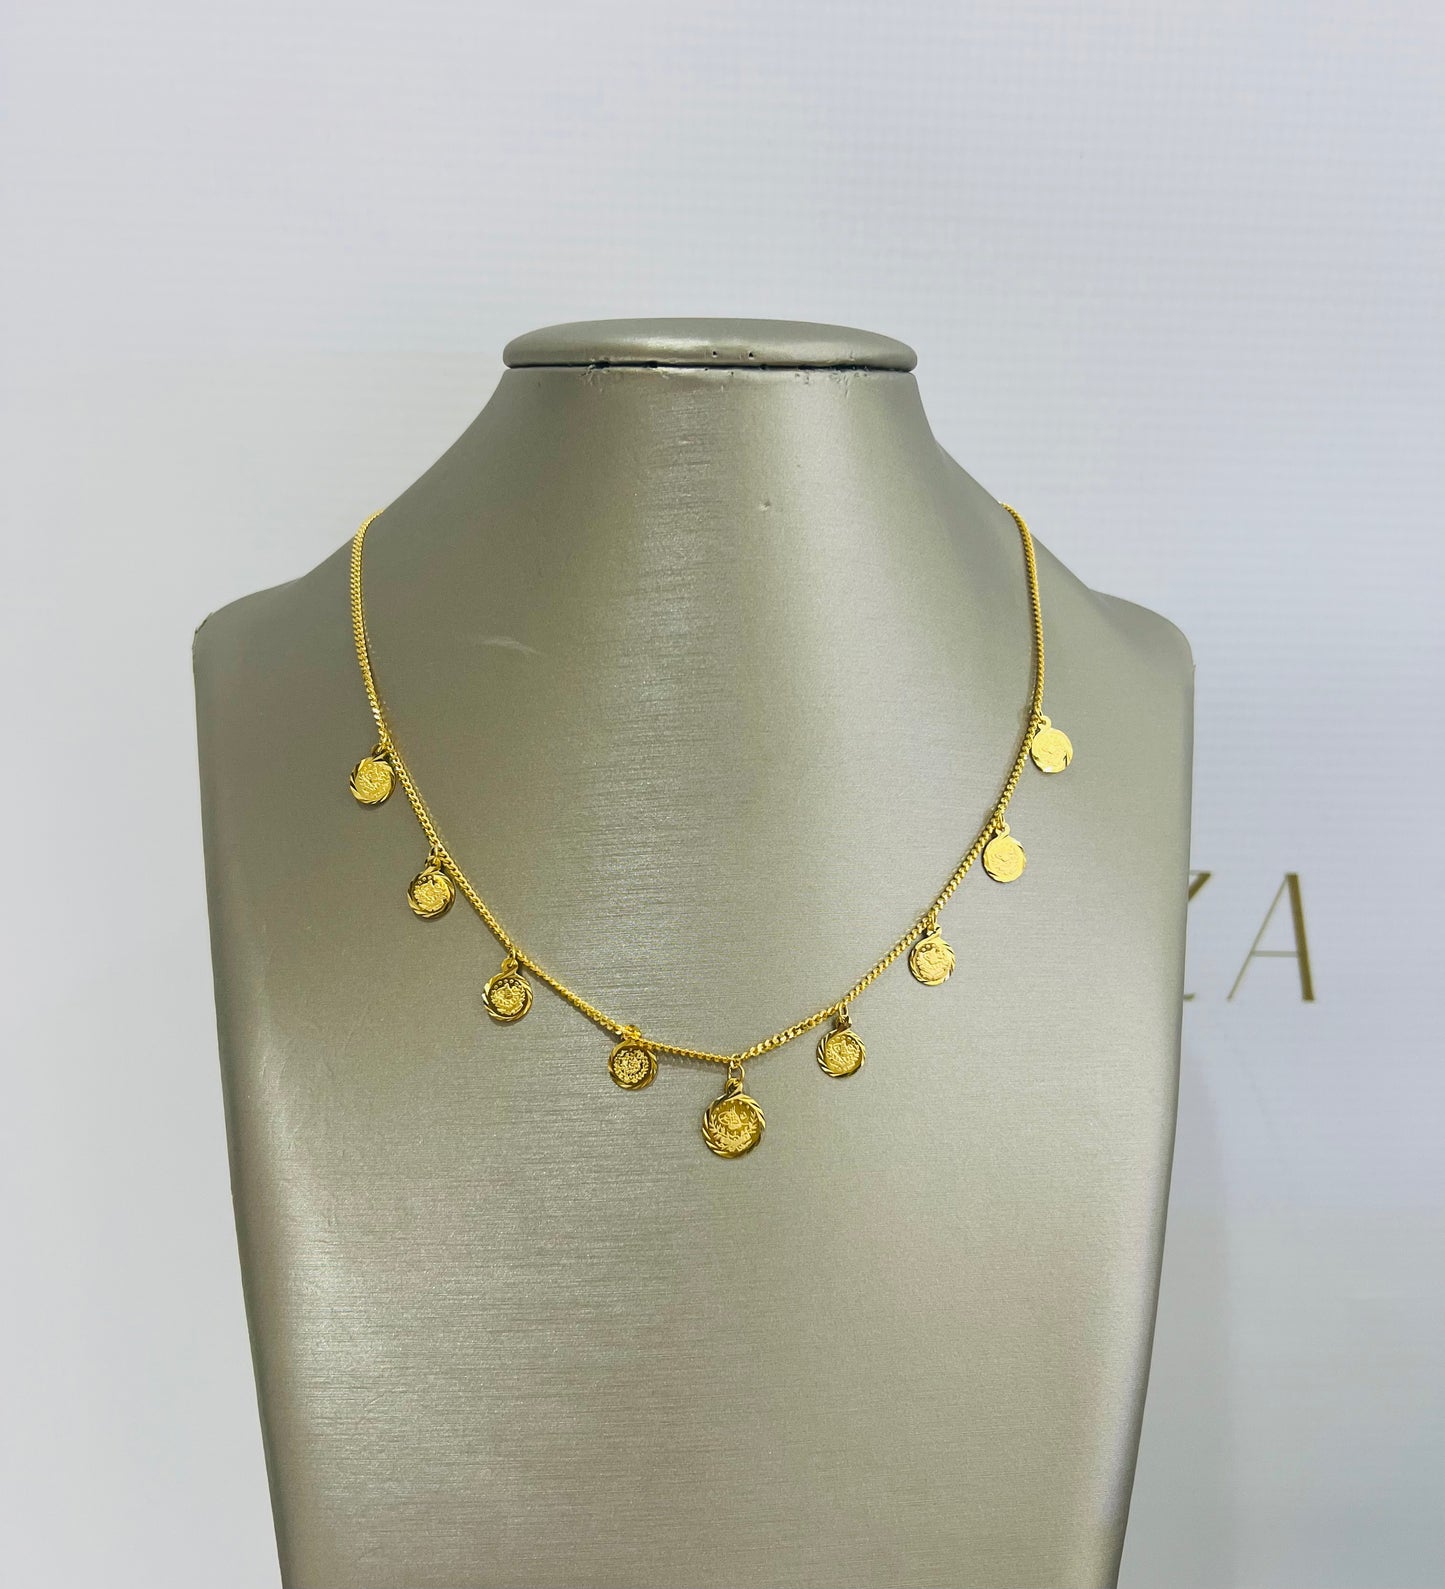 21k Gold Turkish Coin Necklace